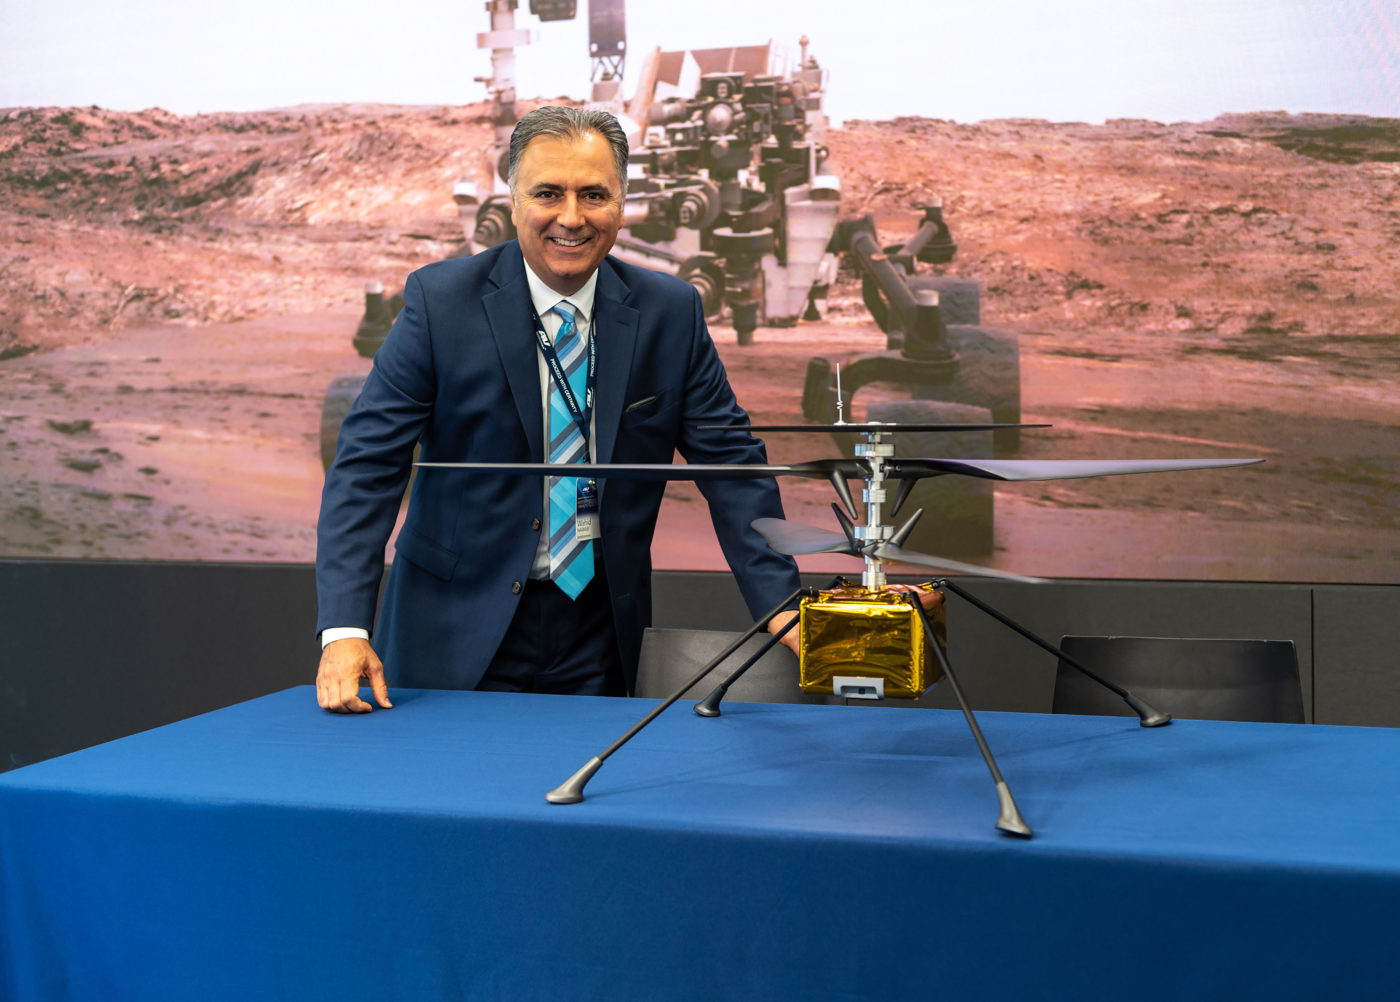 The Mars Helicopter project is led by NASA JPL with team members across JPL, AeroVironment, NASA Ames and NASA Langley.